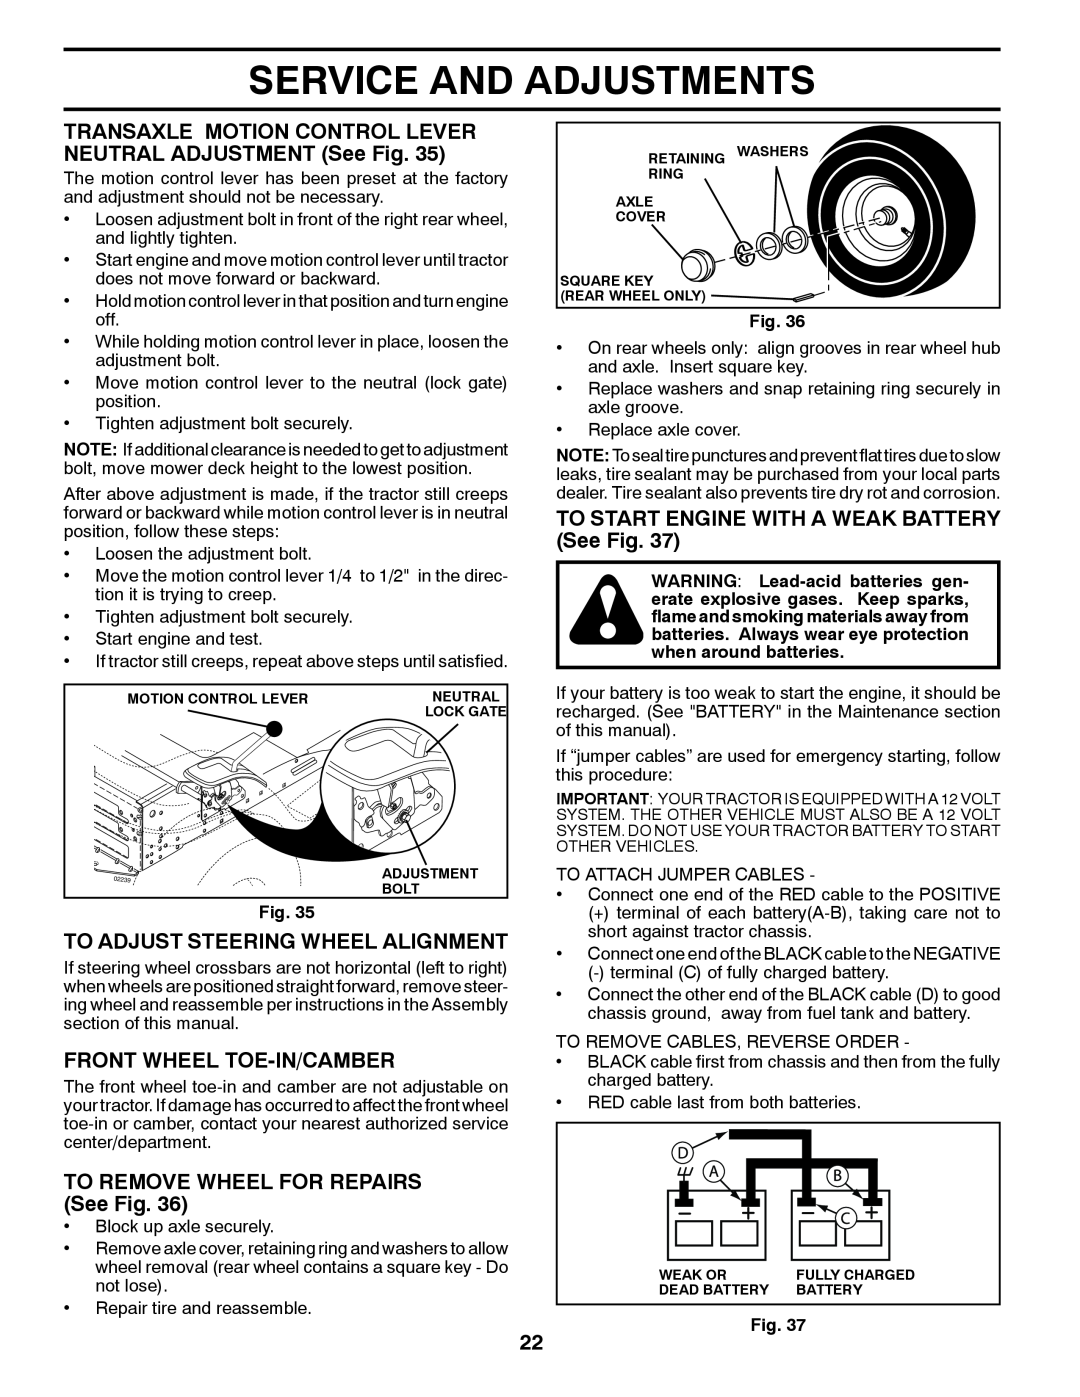 McCulloch 96041018000 manual Service And Adjustments, TRANSAXLE MOTION CONTROL LEVER NEUTRAL ADJUSTMENT See Fig 